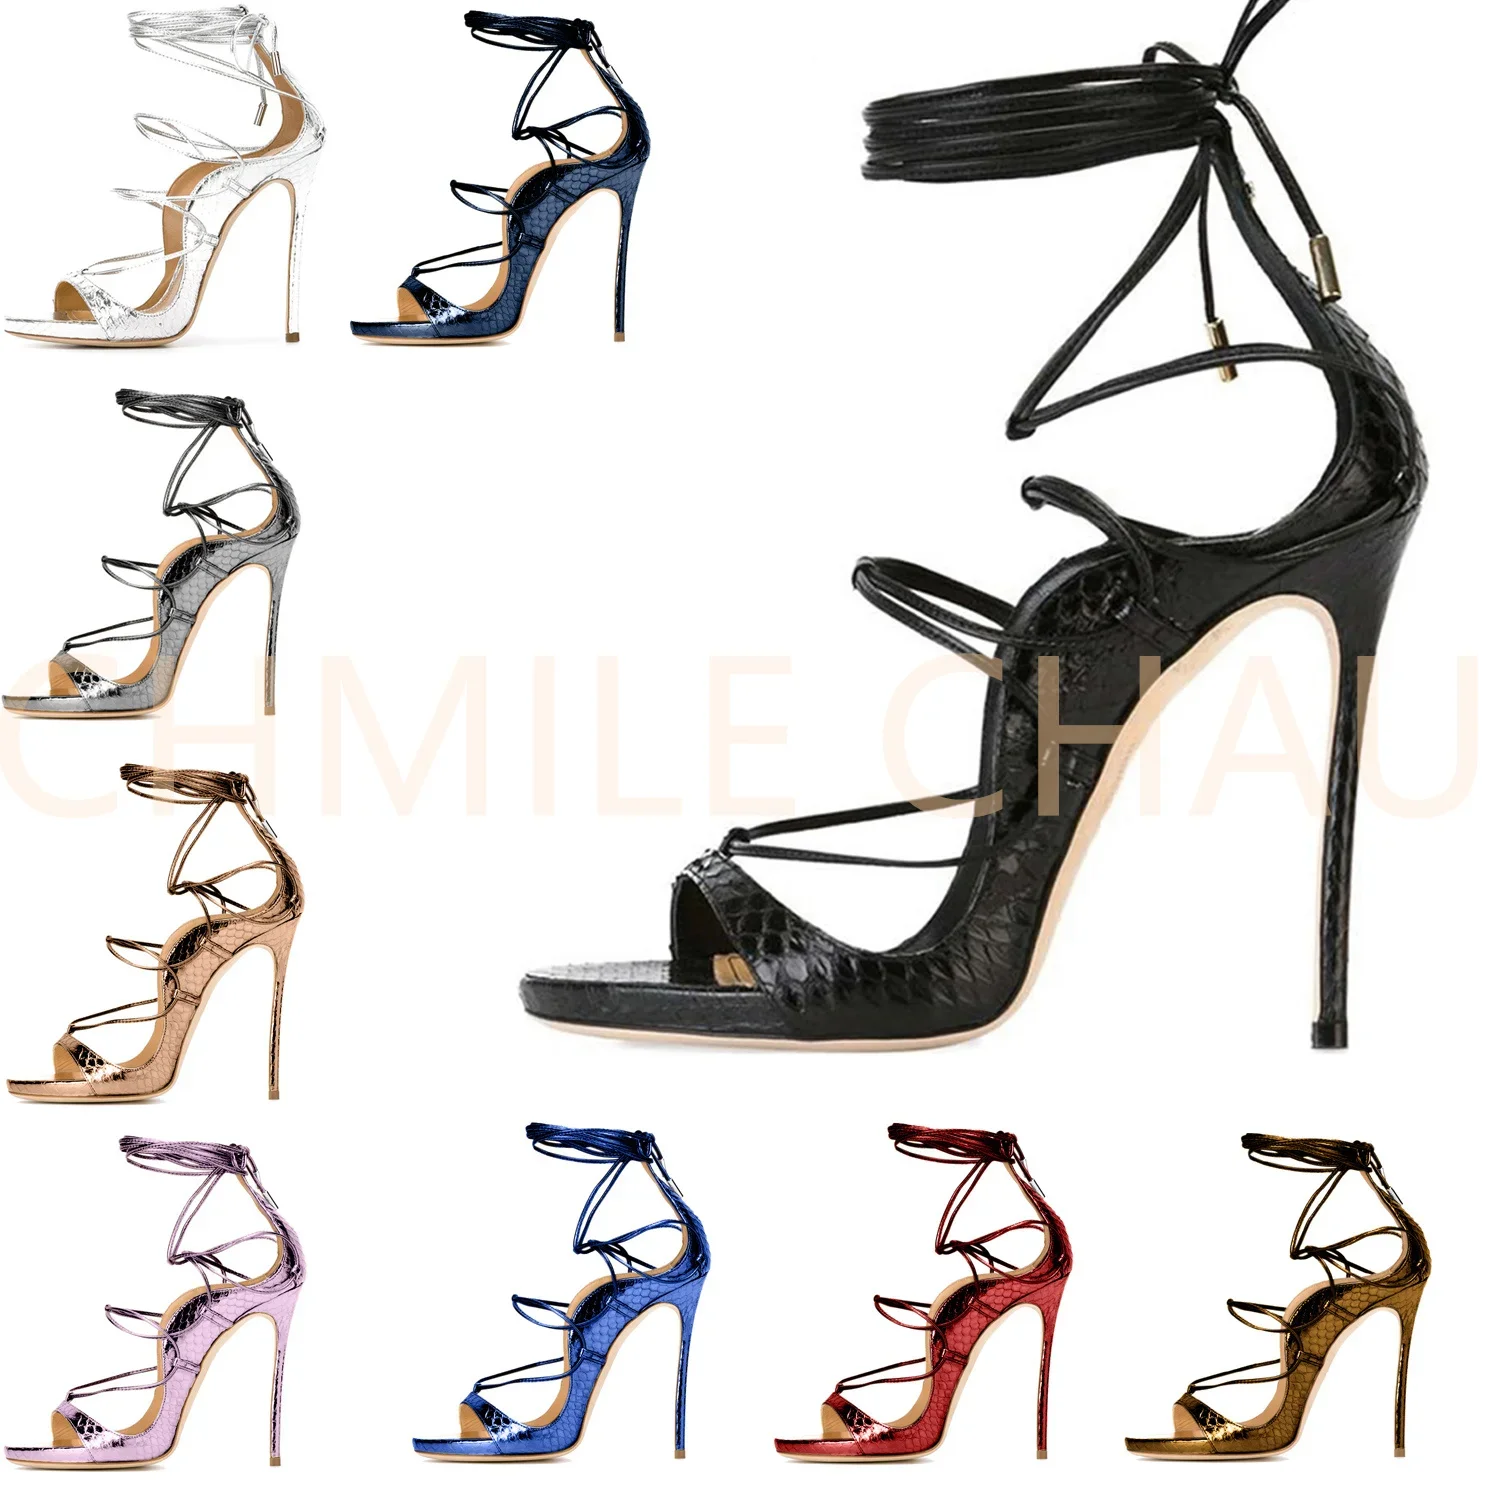 【measure-your-feet-length-before-order】women-high-heels-sandals-rome-gladiator-lace-up-evening-party-dress-lady-shoes-5-chc-11